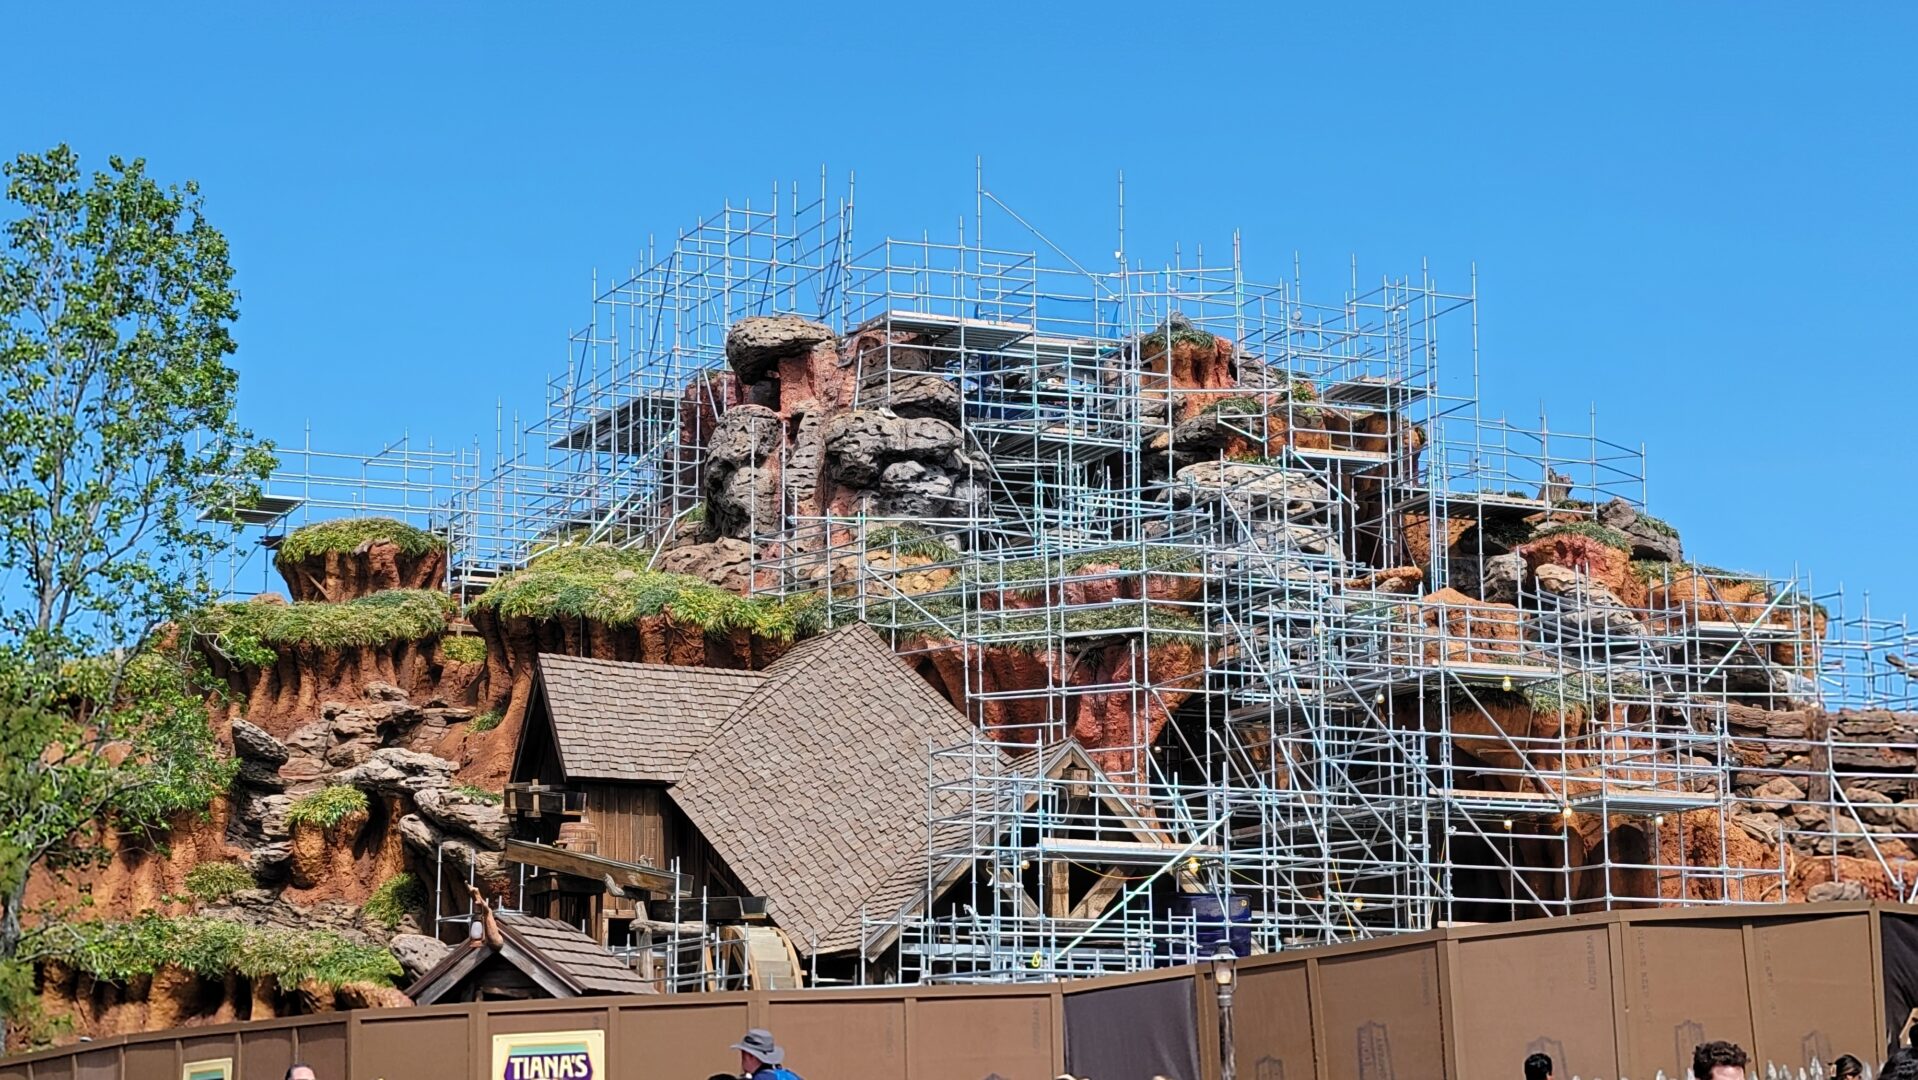 Scaffolding Covers Splash Mountain as Work Continues on Tiana’s Bayou Adventure